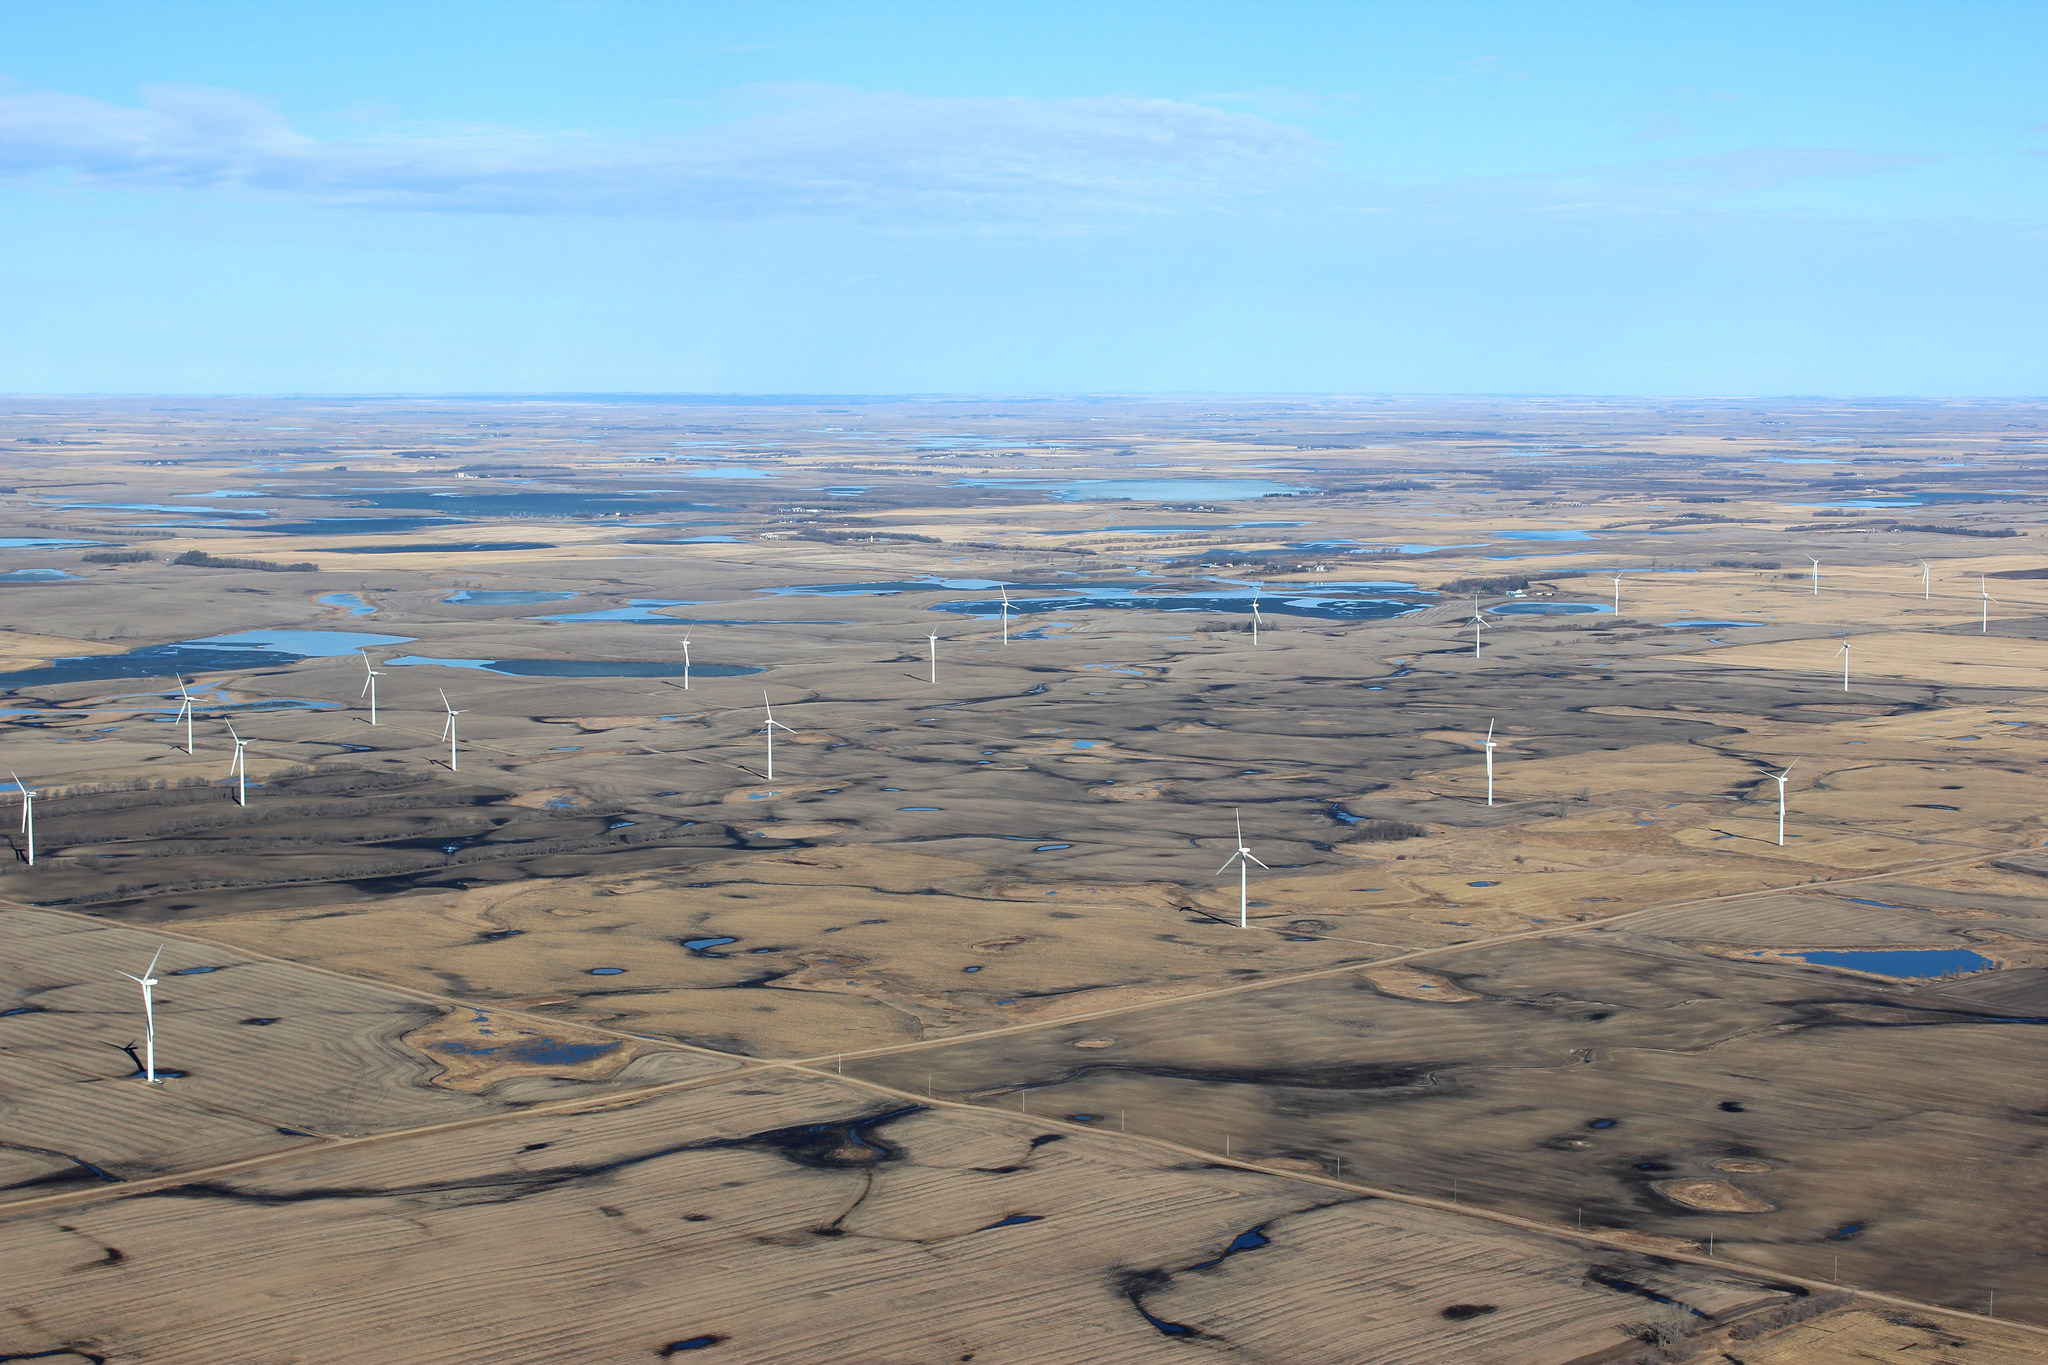 Wind energy is developing across the U.S. Upper Great Plains states.